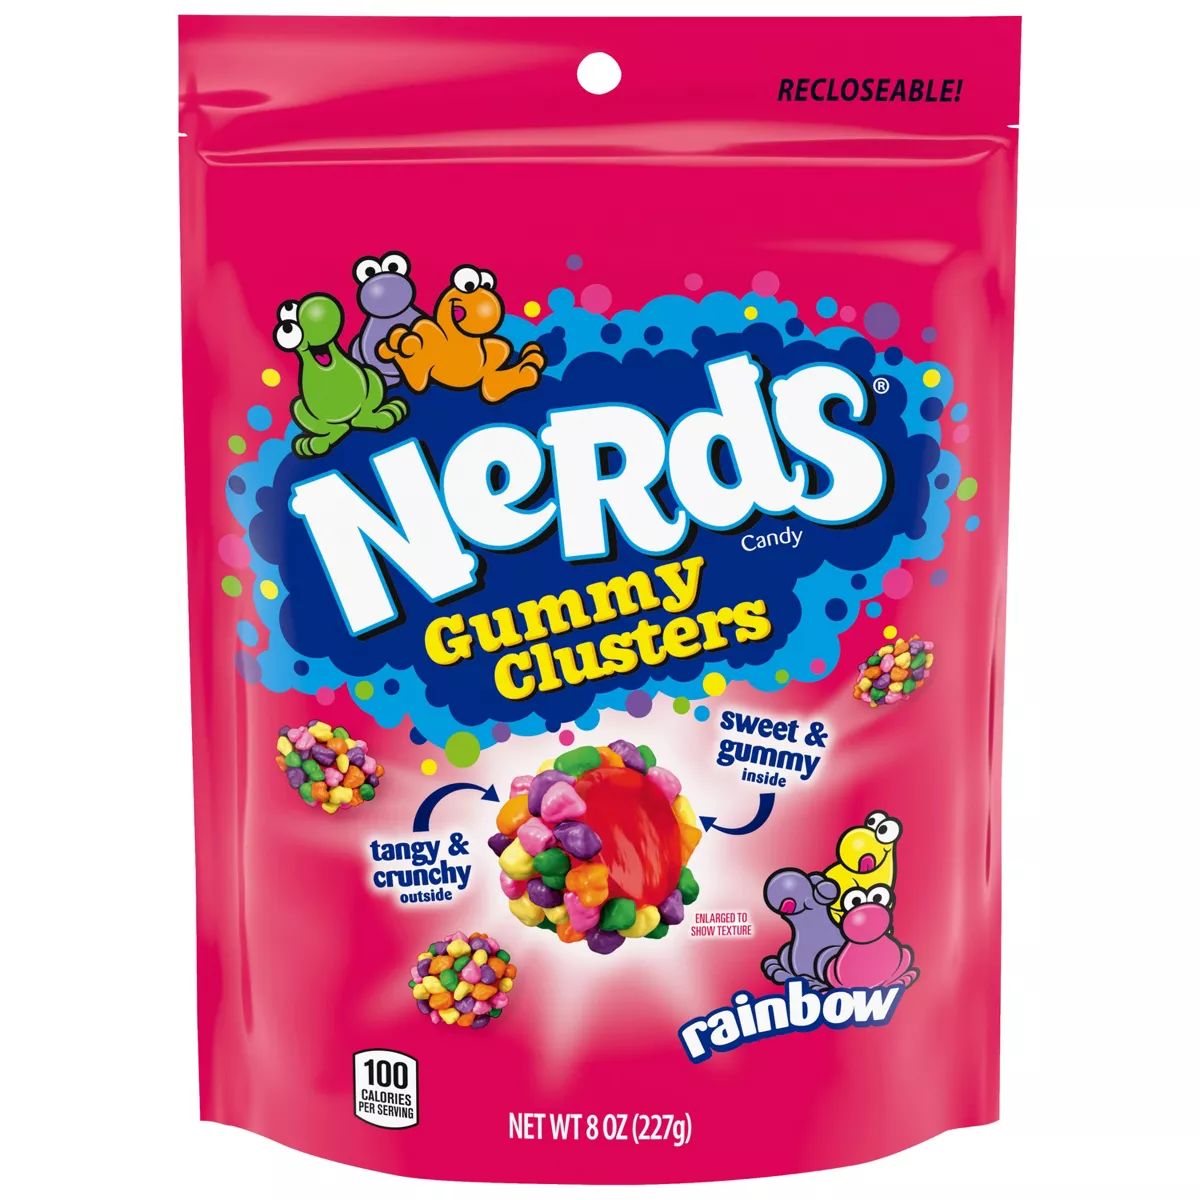 Nerds Gummy Clusters Candy - 8oz | Target